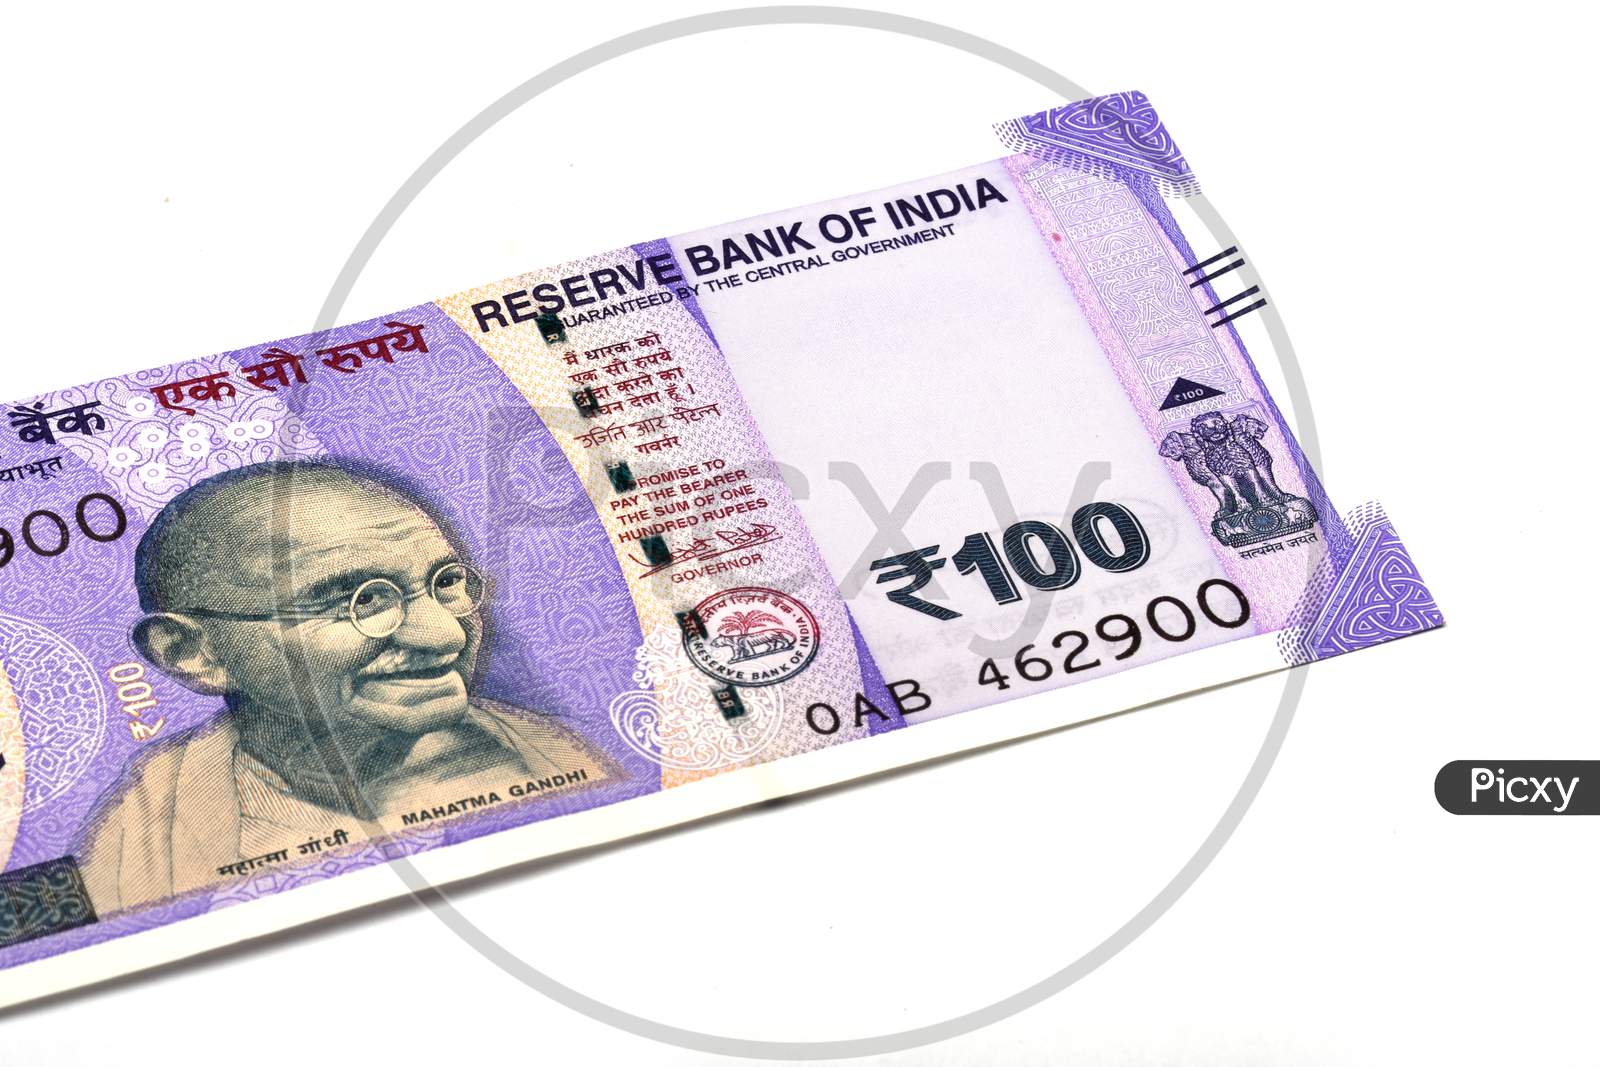 New Indian Currency Of 100 Rupee Note On White Isolated Background, Indian Currency, Rupee, Indian Rupee,Indian Money